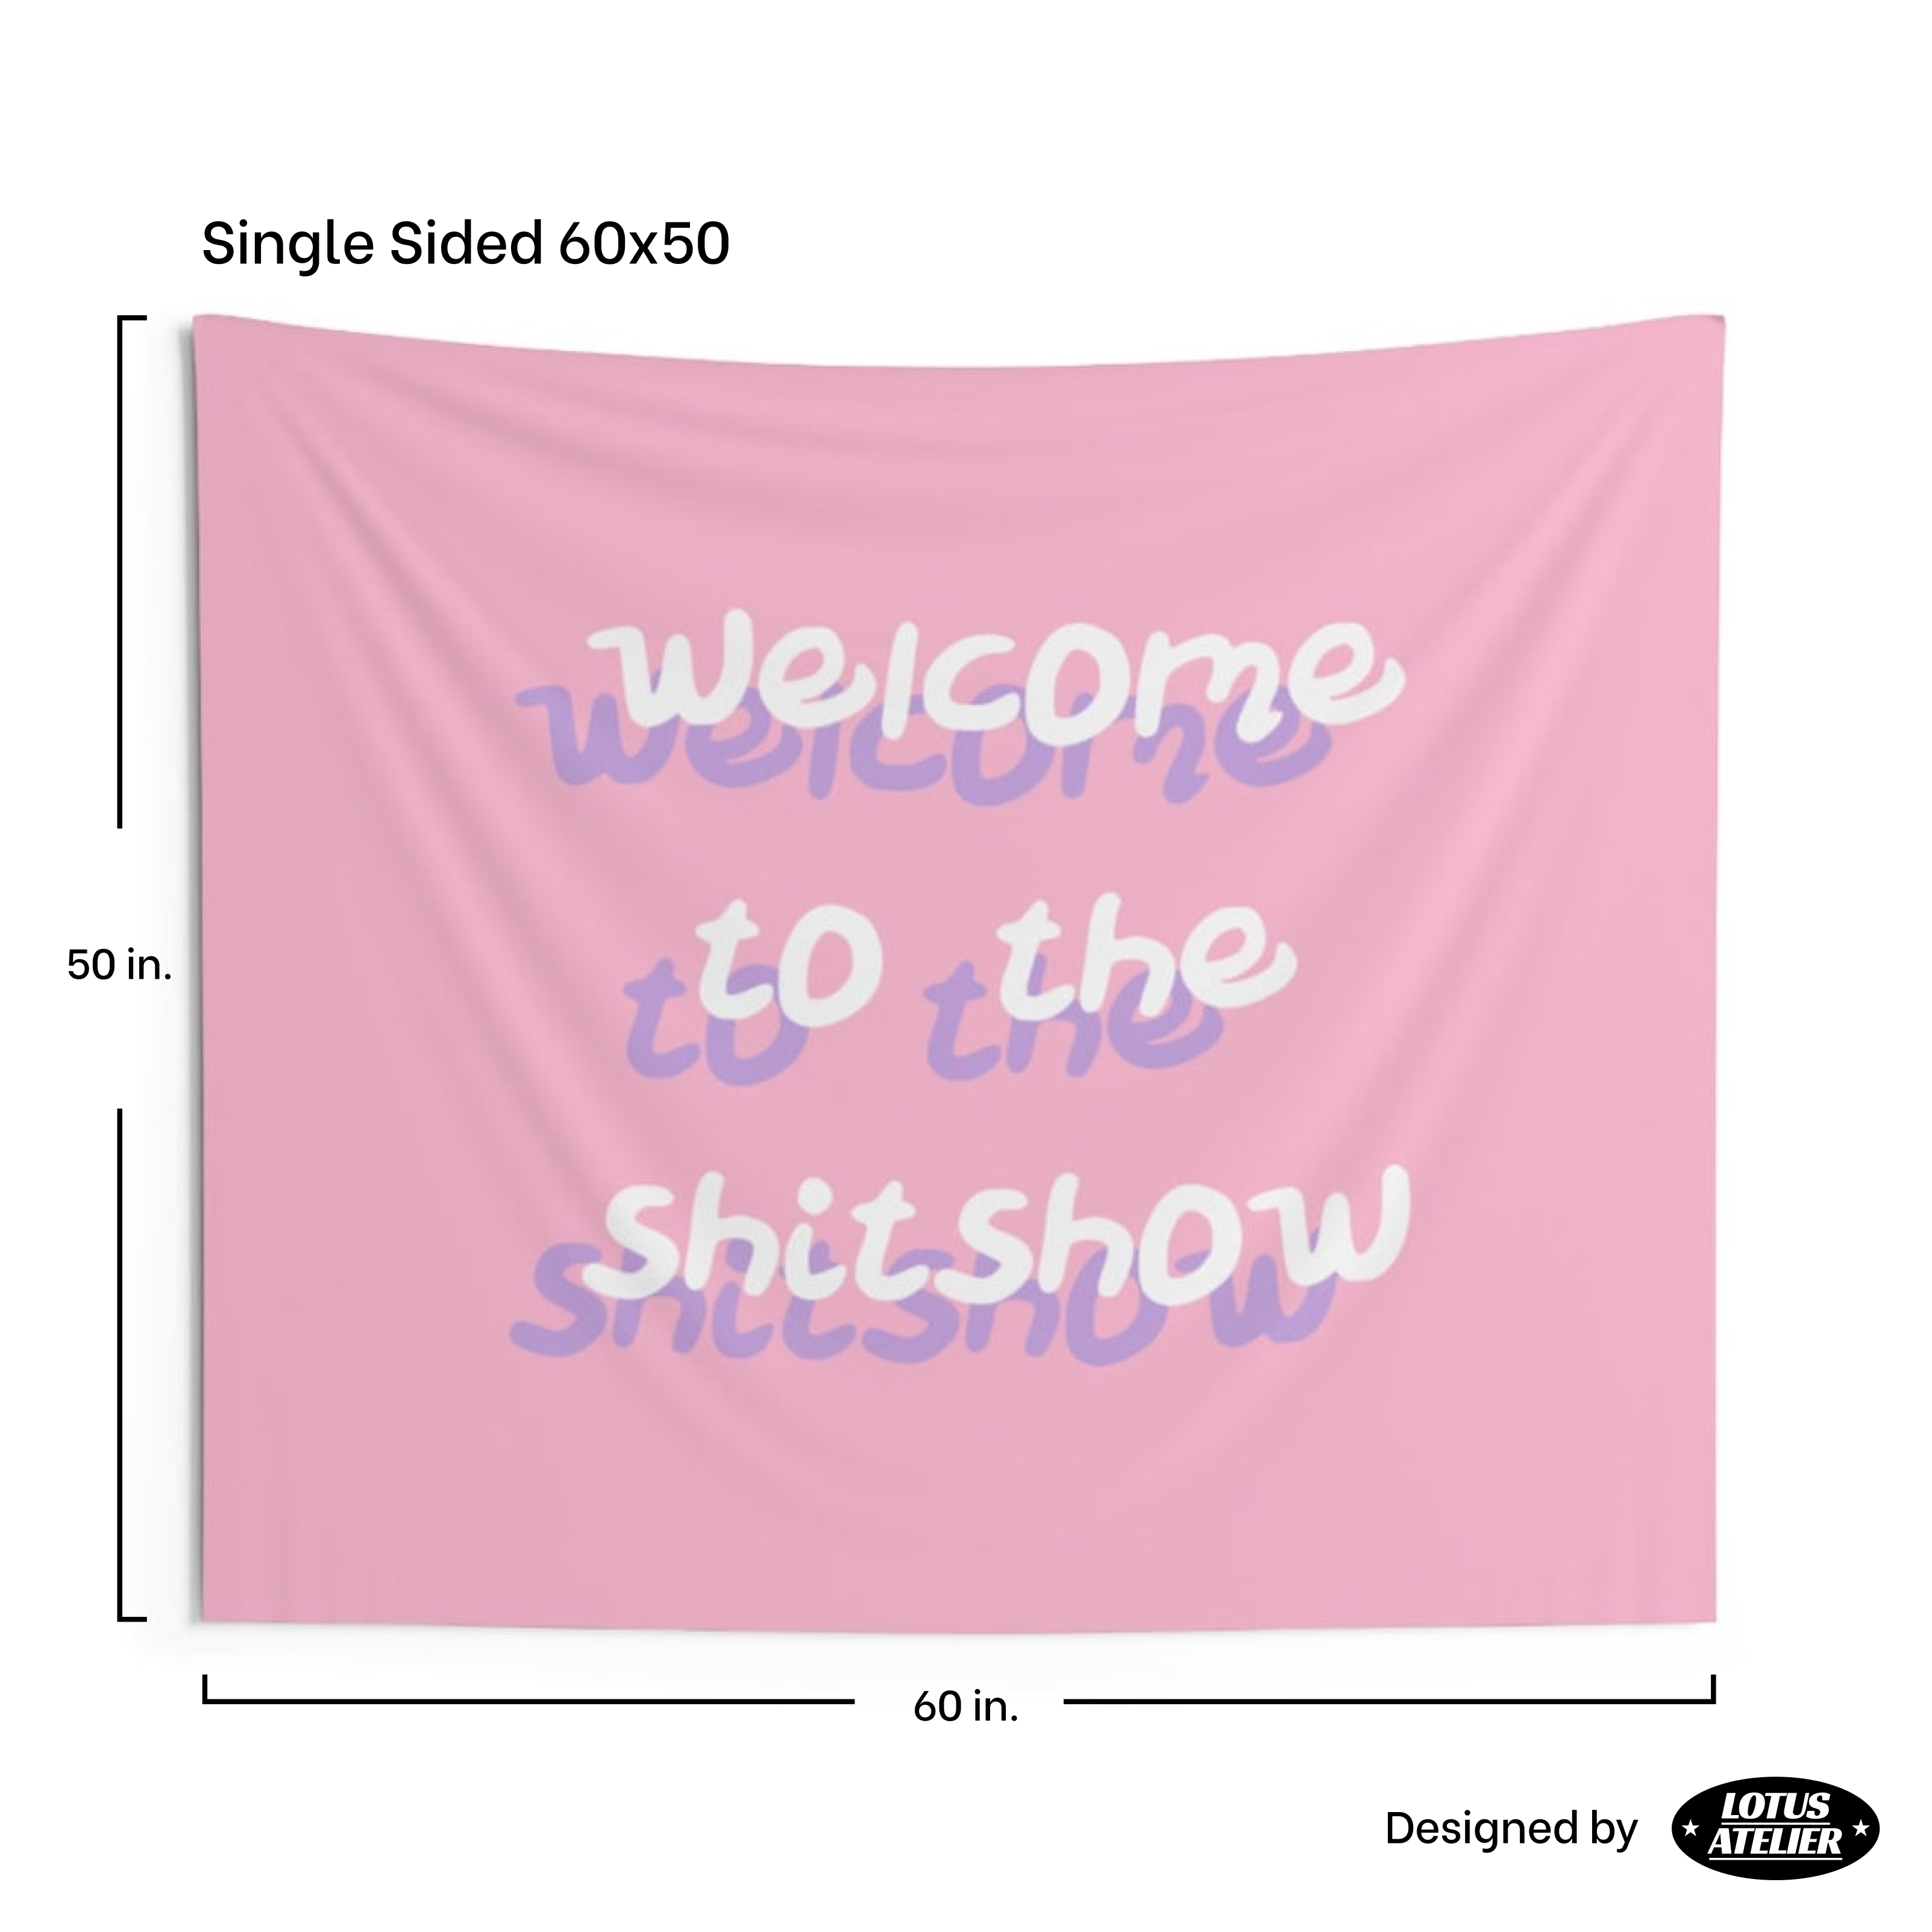 Pink Welcome to the Shitshow Tapestry Cute | Teen Bedroom Pink Tapestry | College Dorm Room Decor Girls | Multiple Size